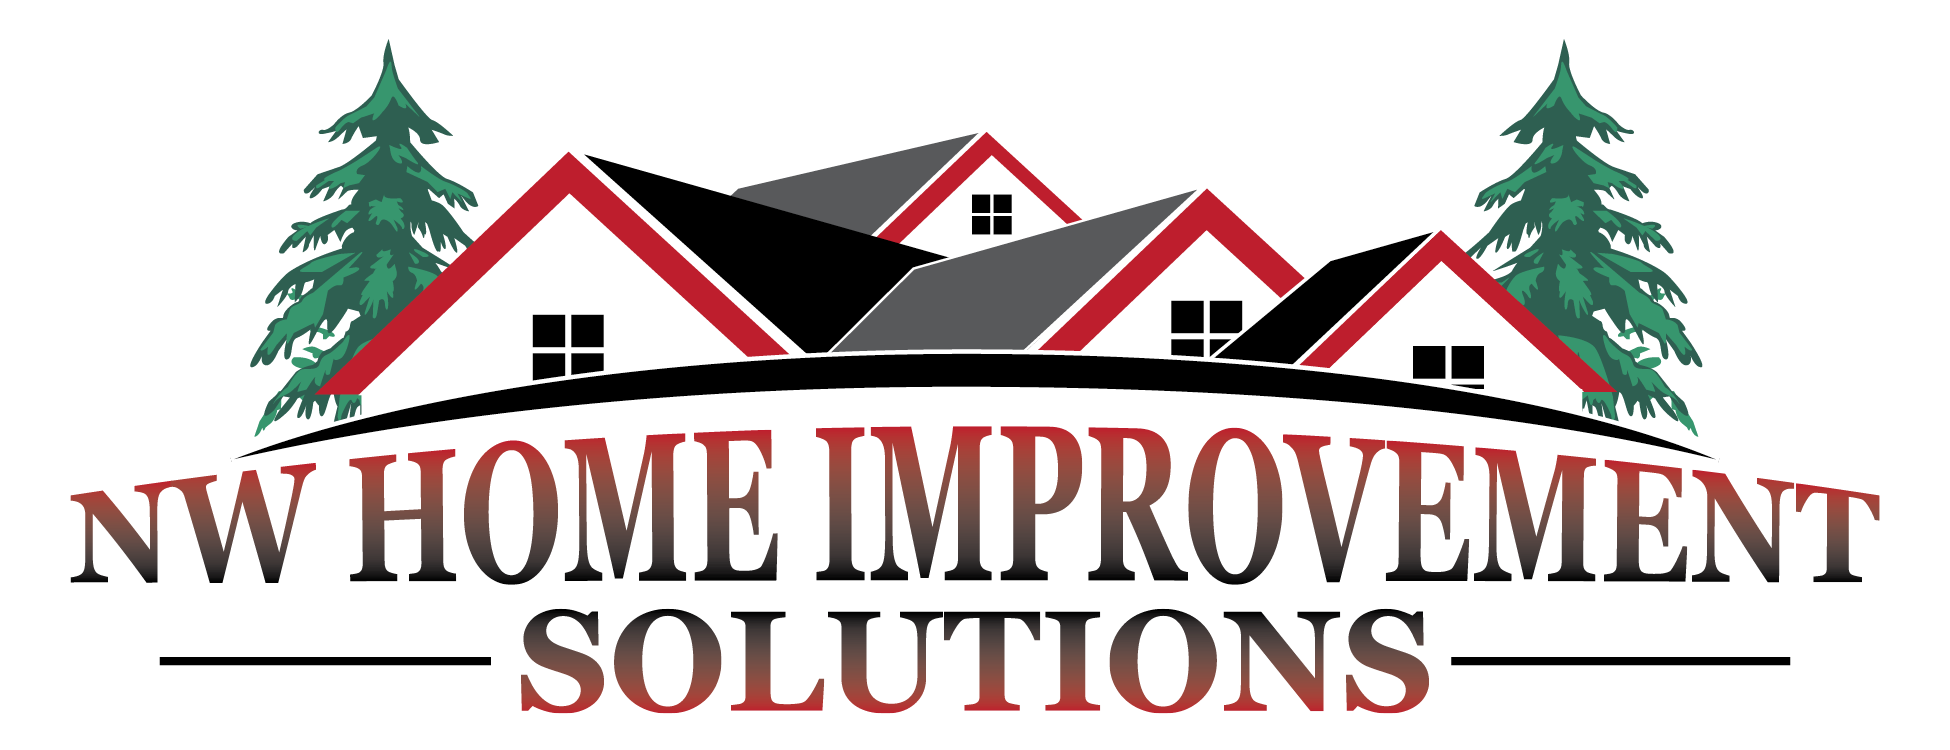 Download Clipart home home improvement, Clipart home home ...